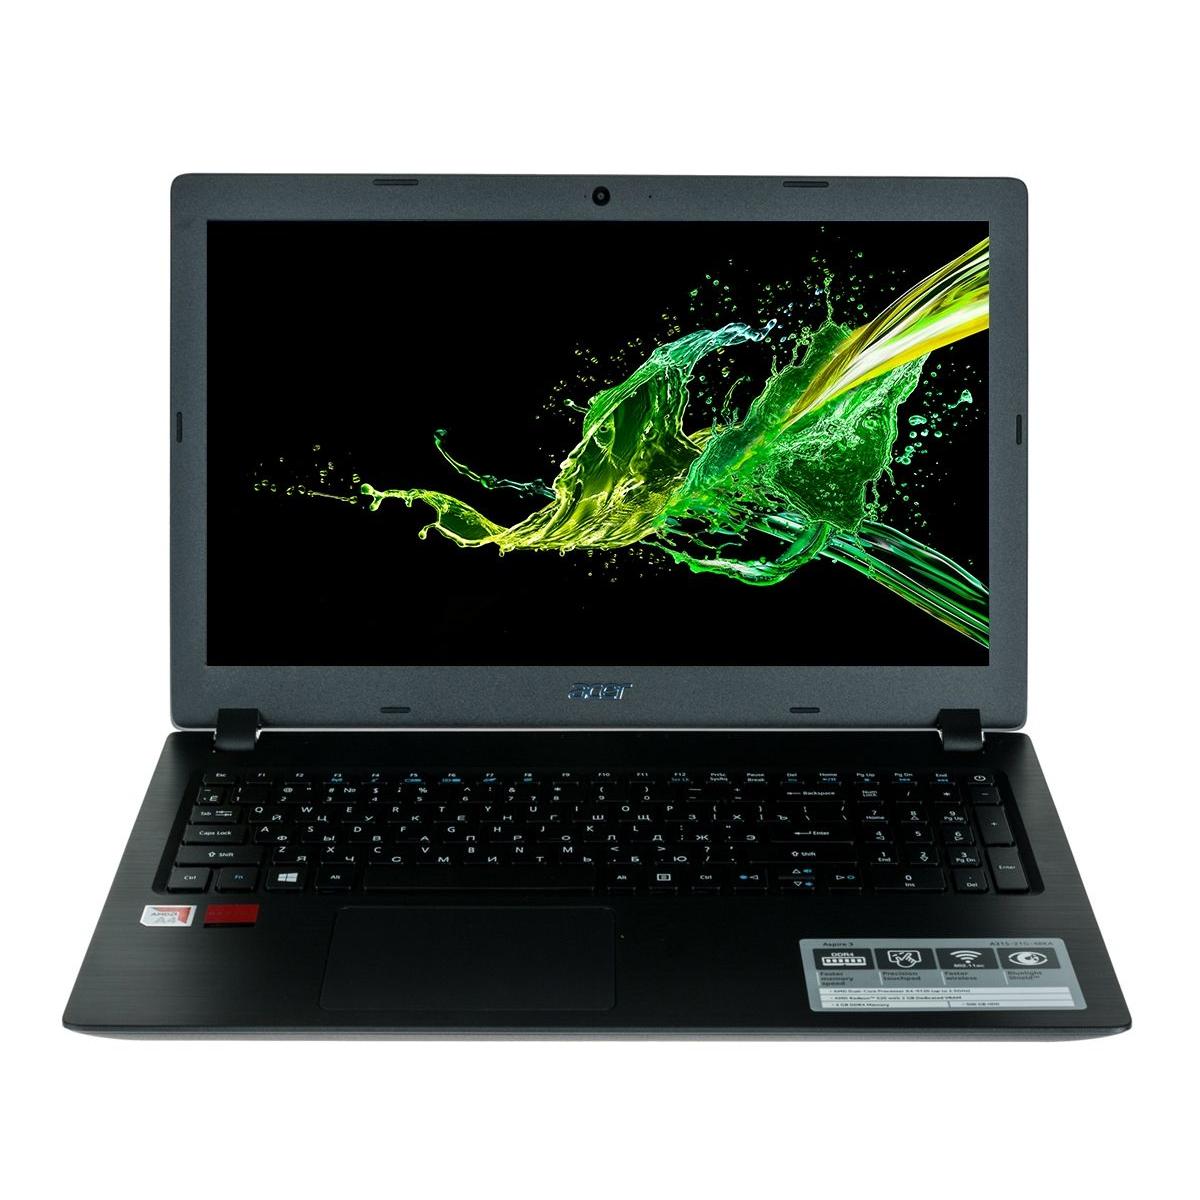 Aspire es1 732. Acer Aspire es1-732. Acer Aspire 3 a315-21. Acer Aspire a315-21g-41dy. Acer ex2540-30r0.